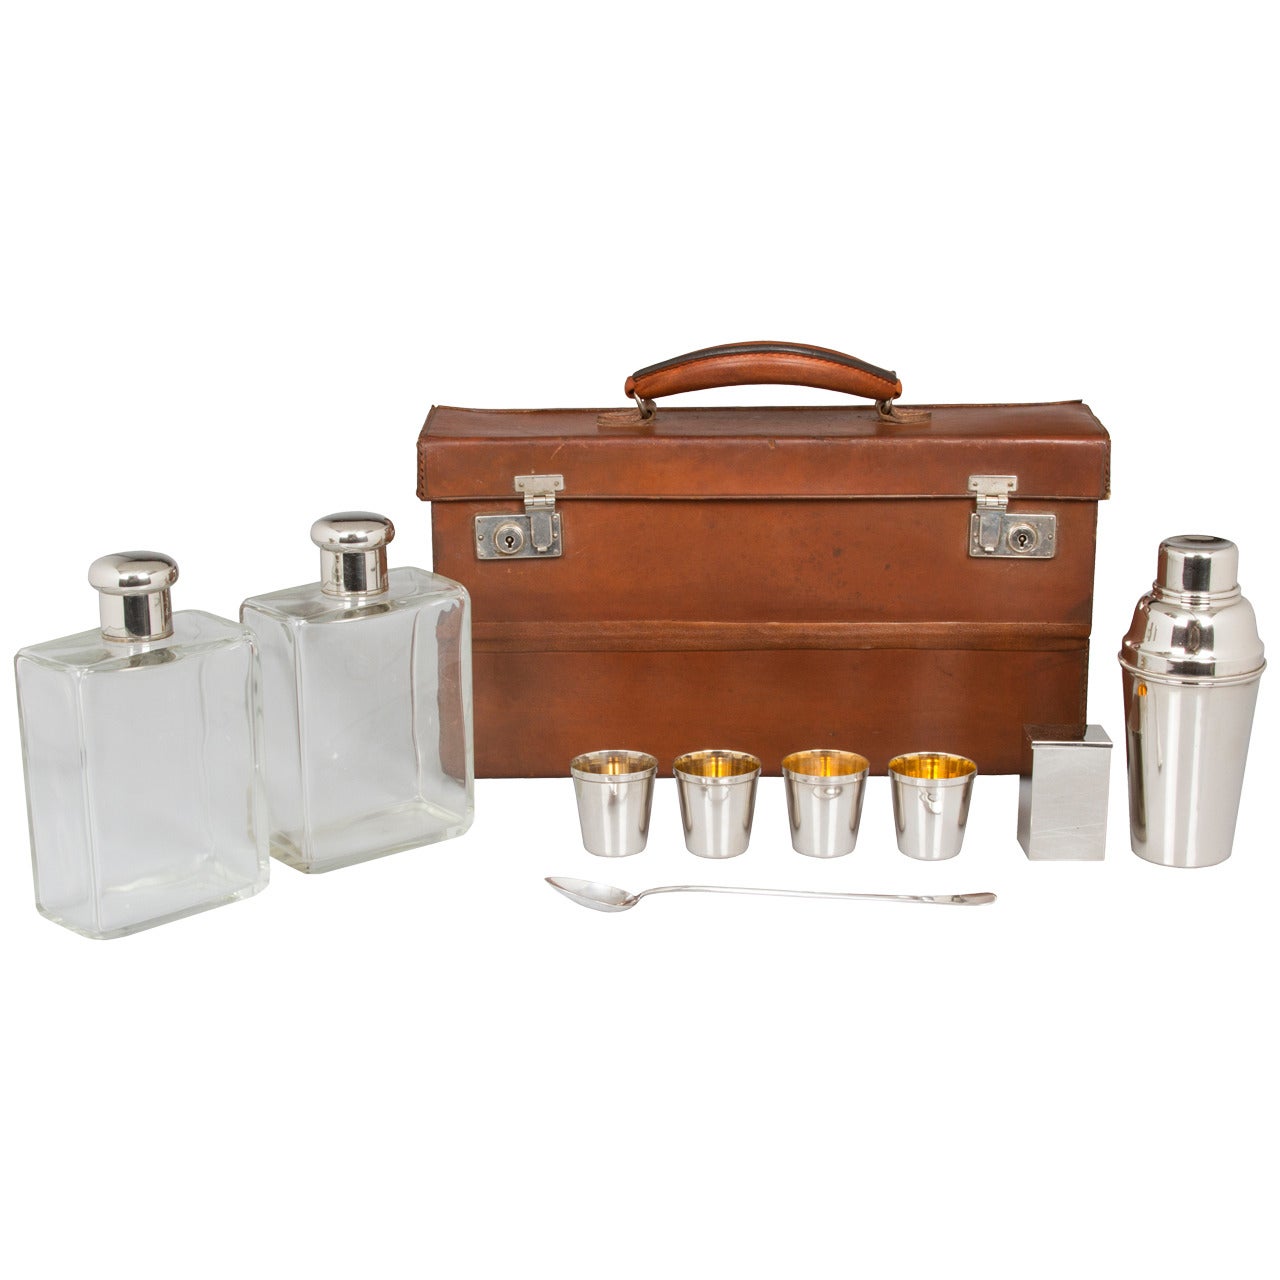 Portable Bar Set in a Leather Case